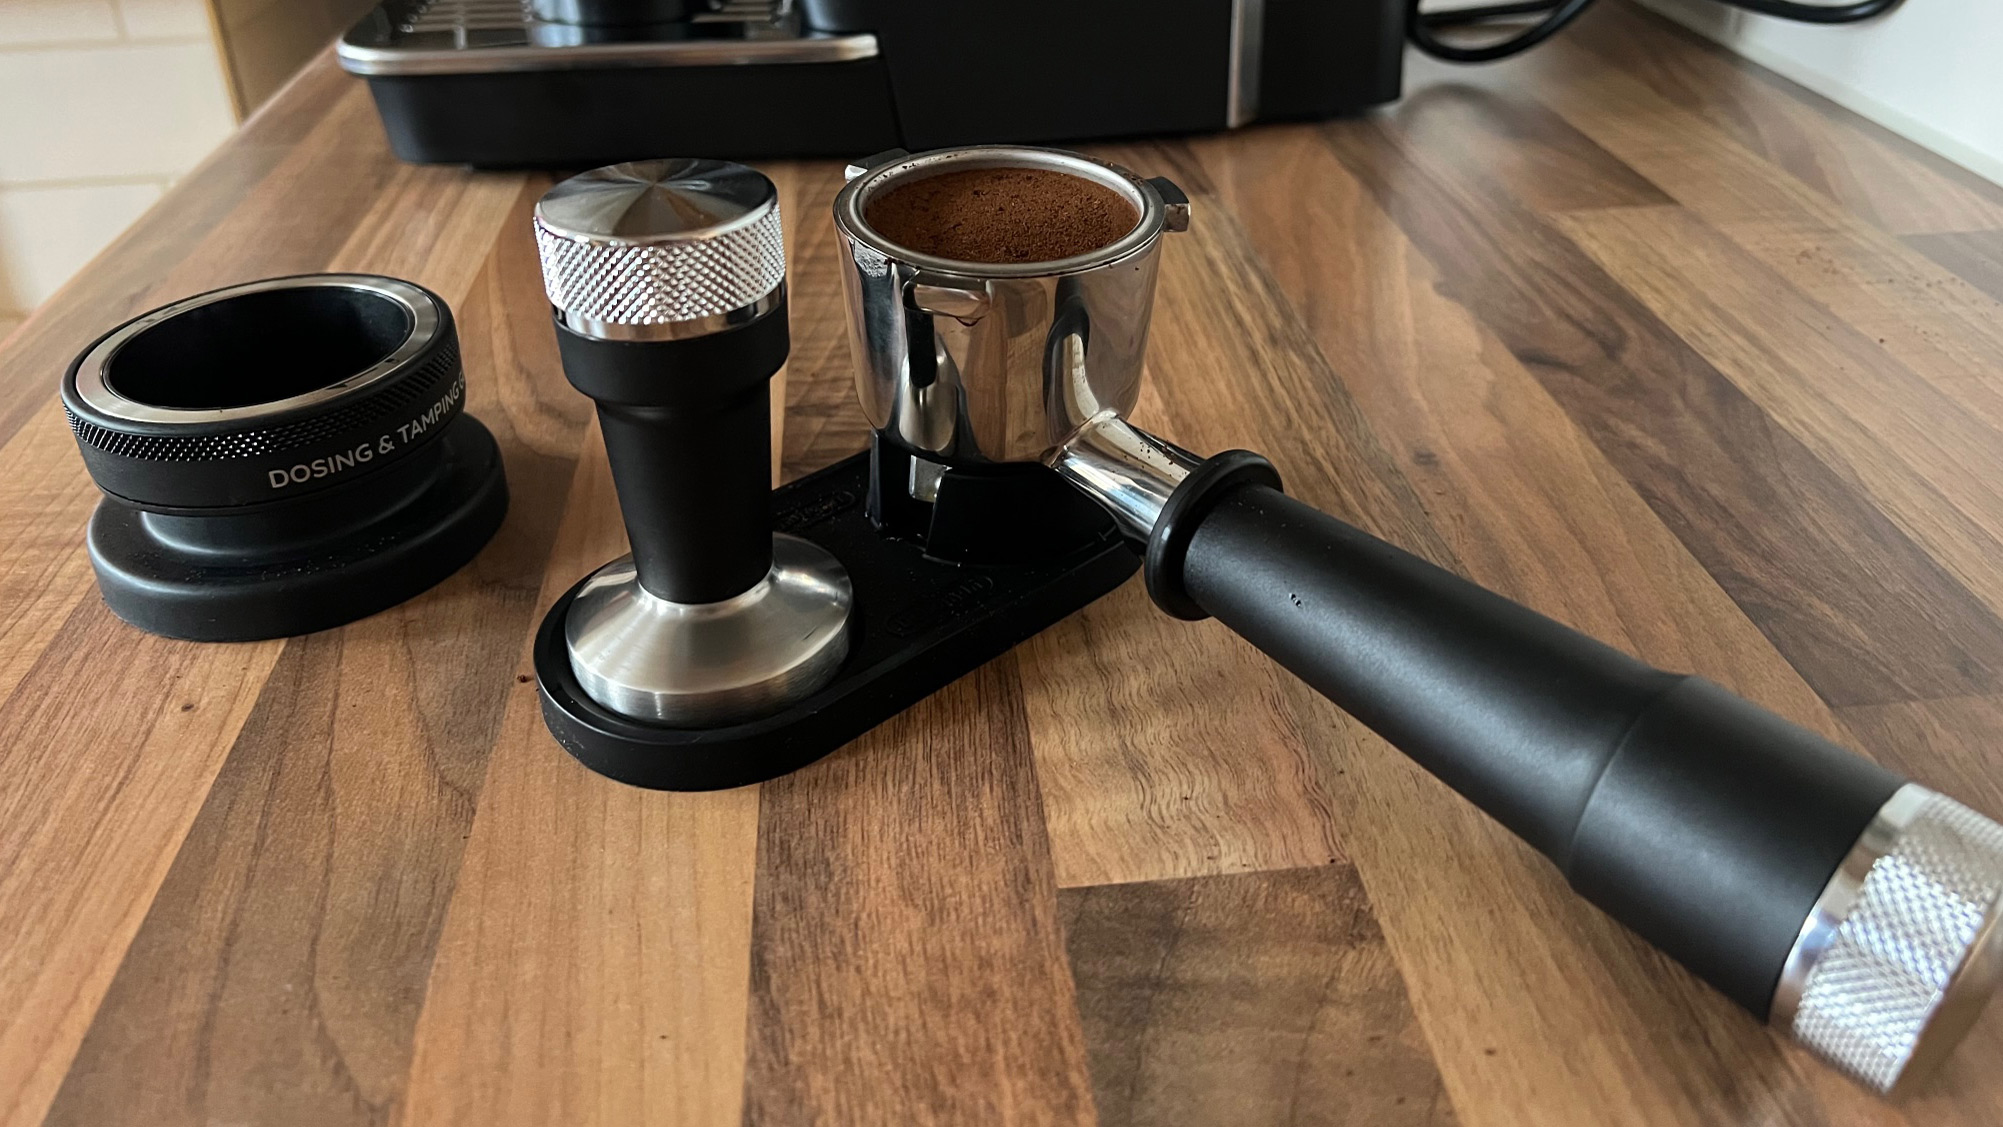 The tamp, tamping stand and dosing funnel that comes with the De’Longhi La Specialista Arte EC9155MB